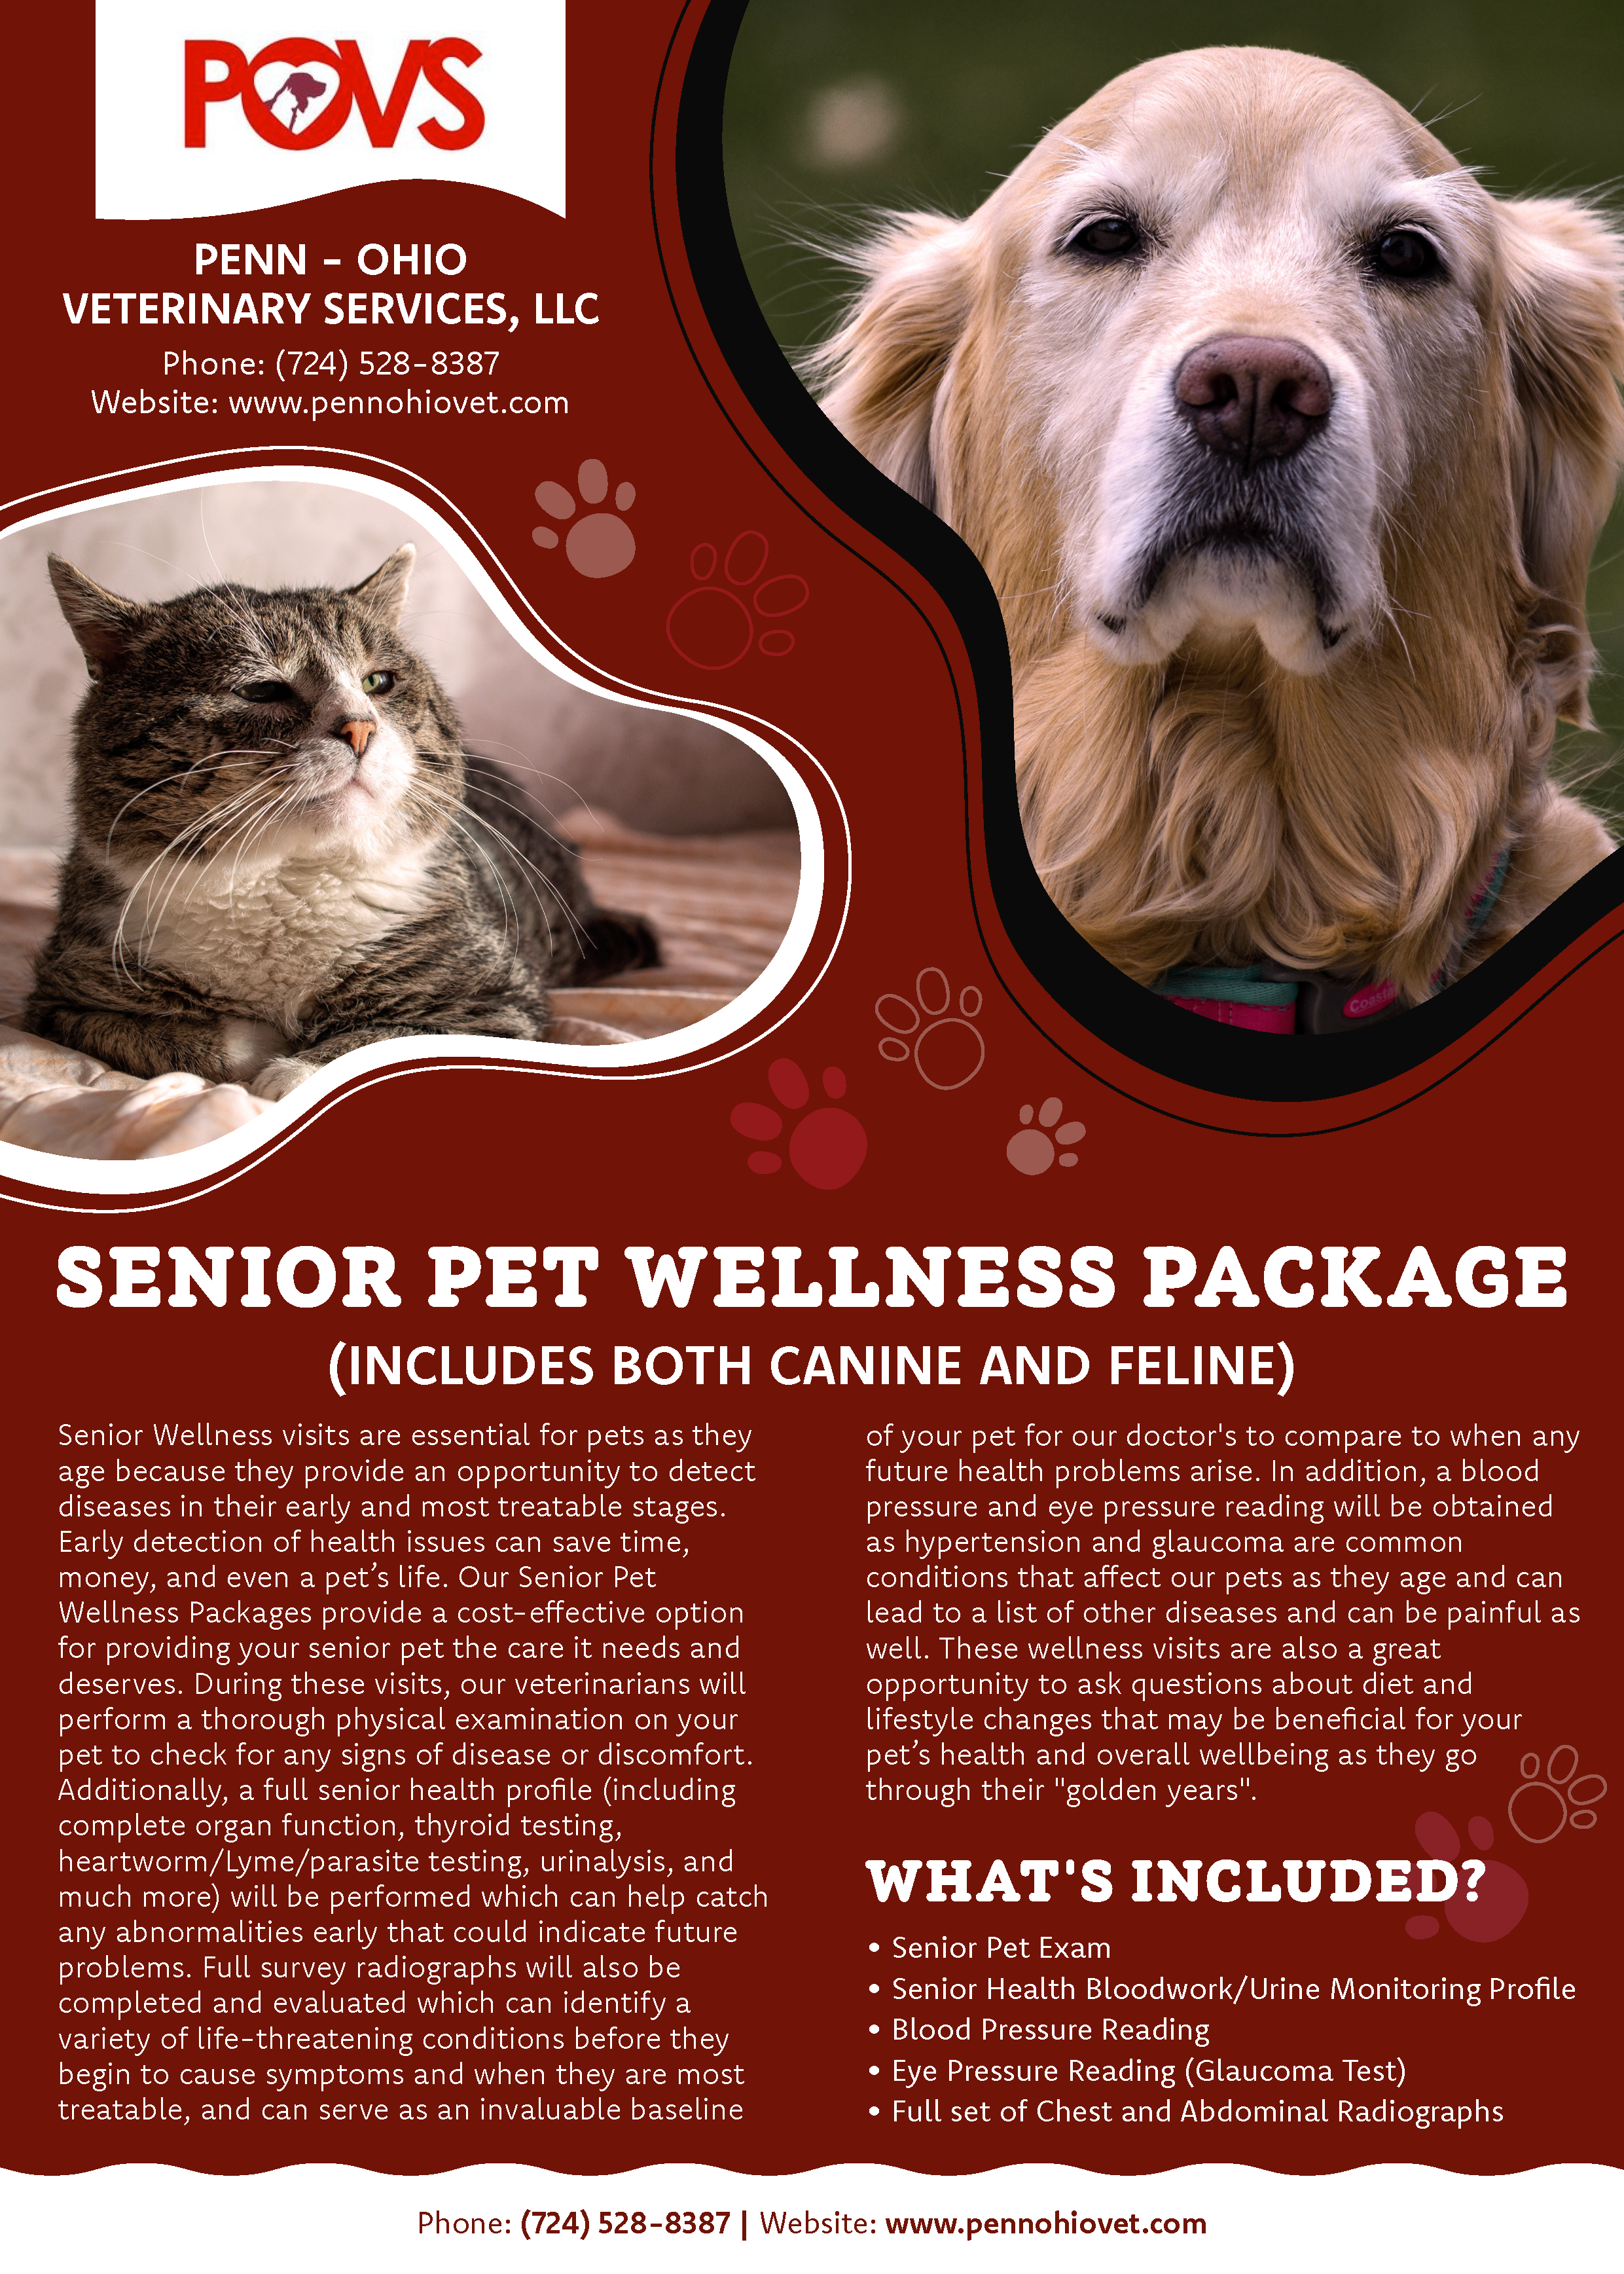 Wellness Packages for Senior Pets